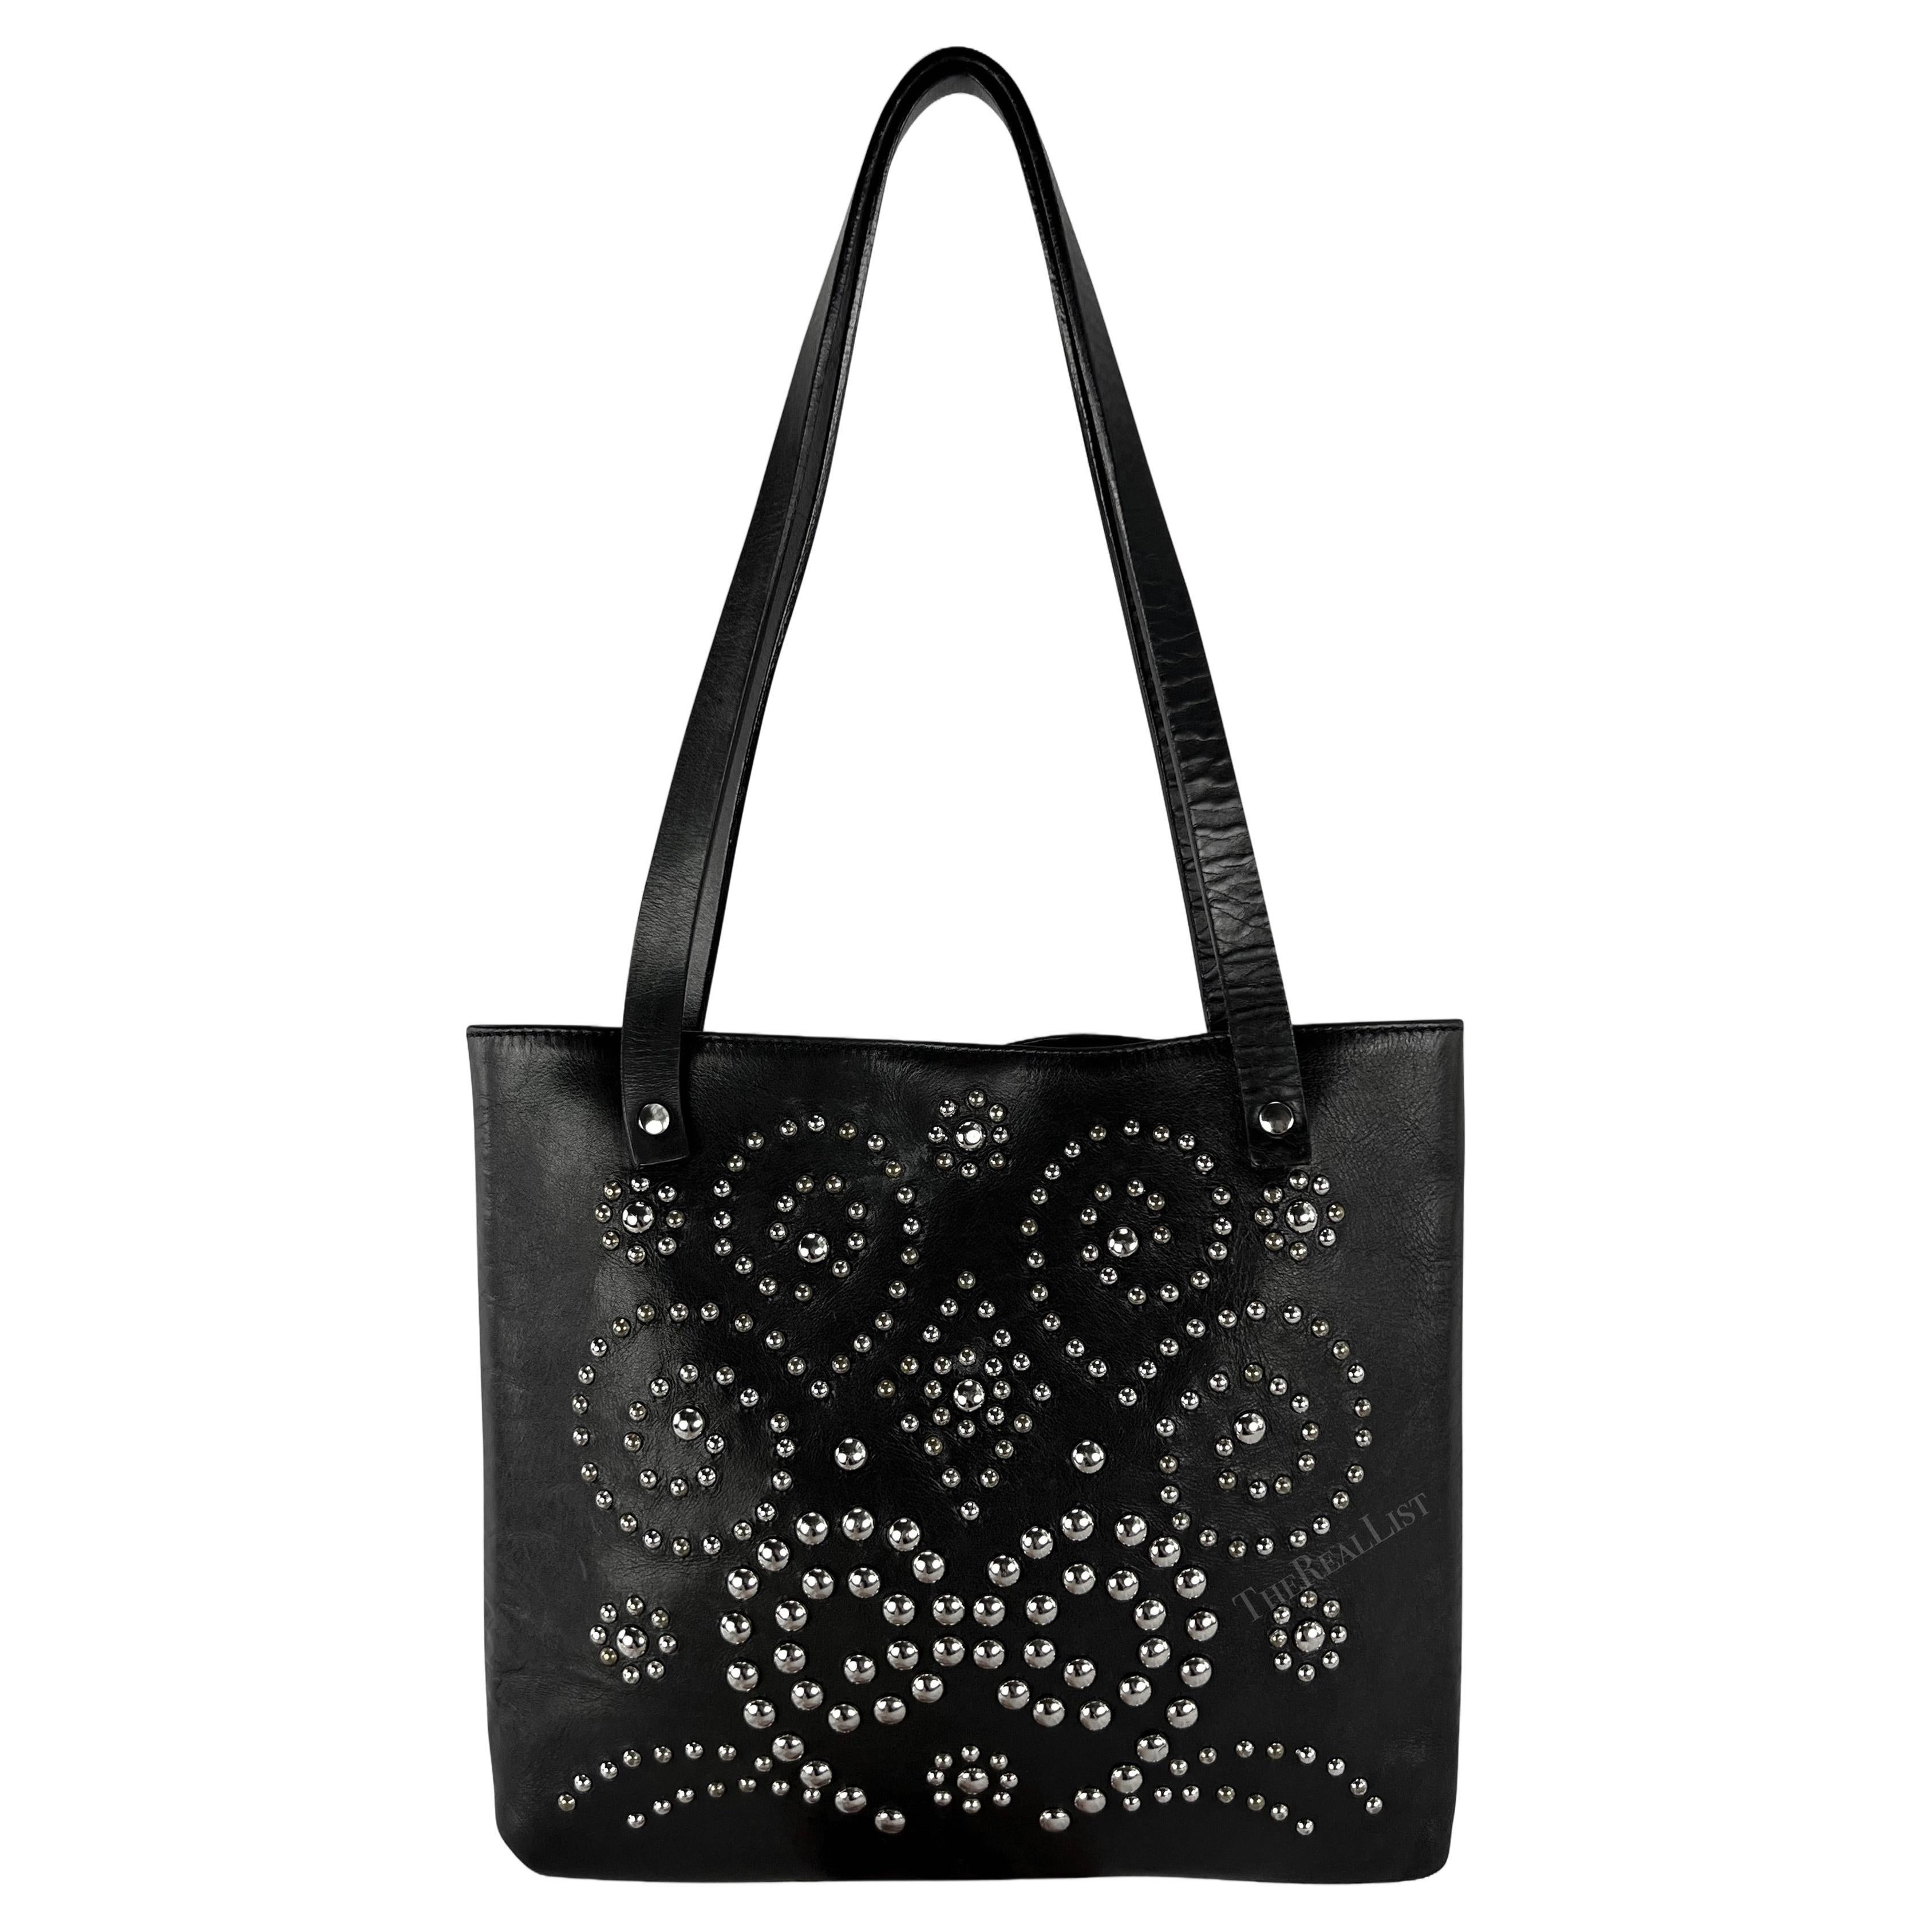 Late 1990s Dolce & Gabbana Black Leather Studded Small Shoulder Tote Bag For Sale 5